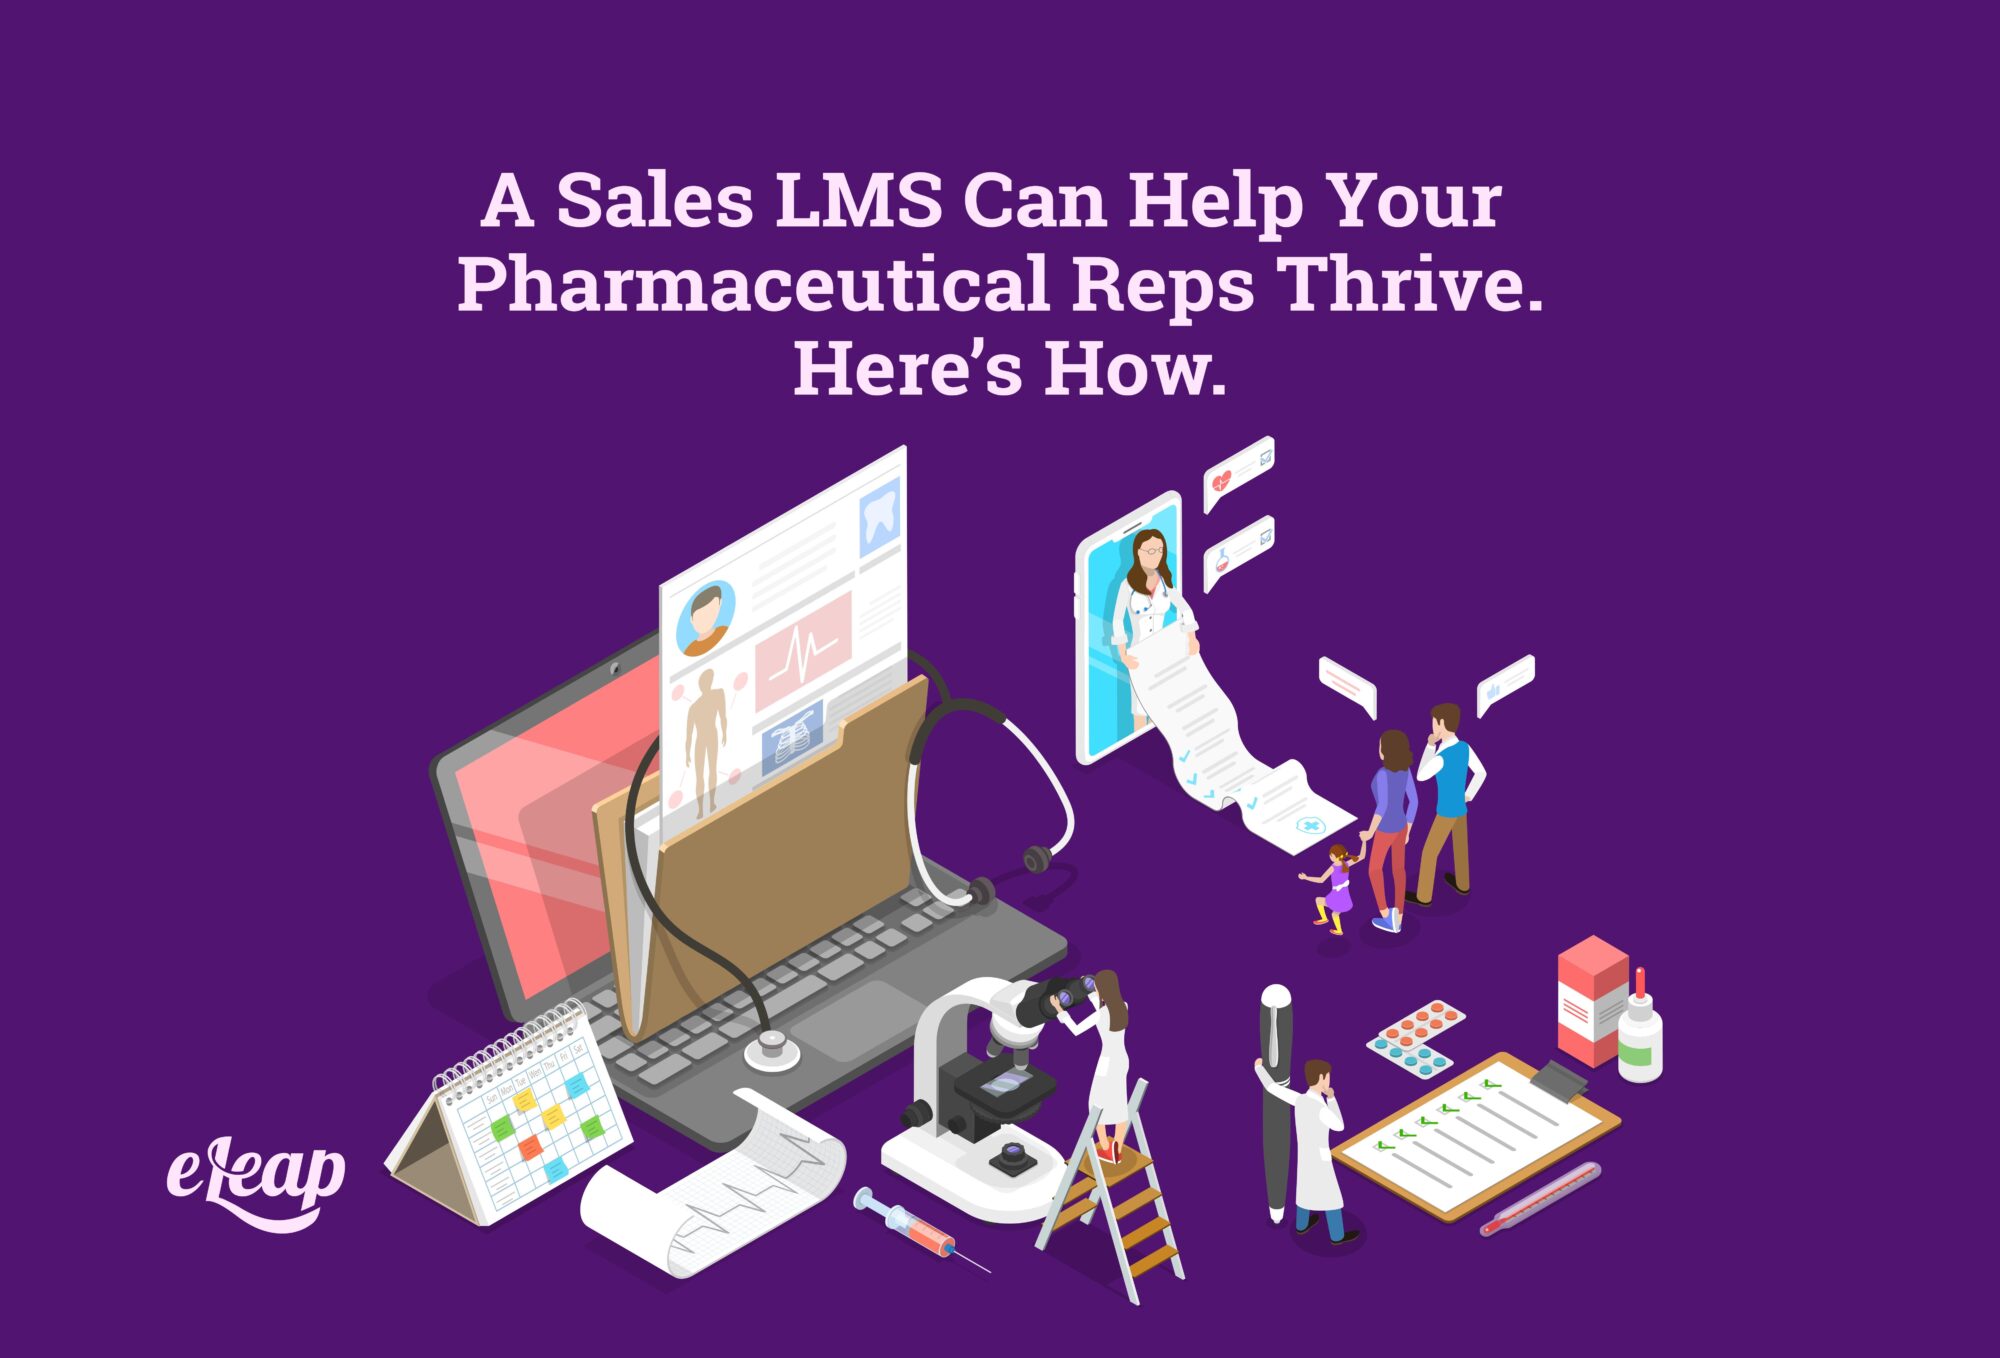 A Sales LMS Can Help Your Pharmaceutical Reps Thrive. Here's How.